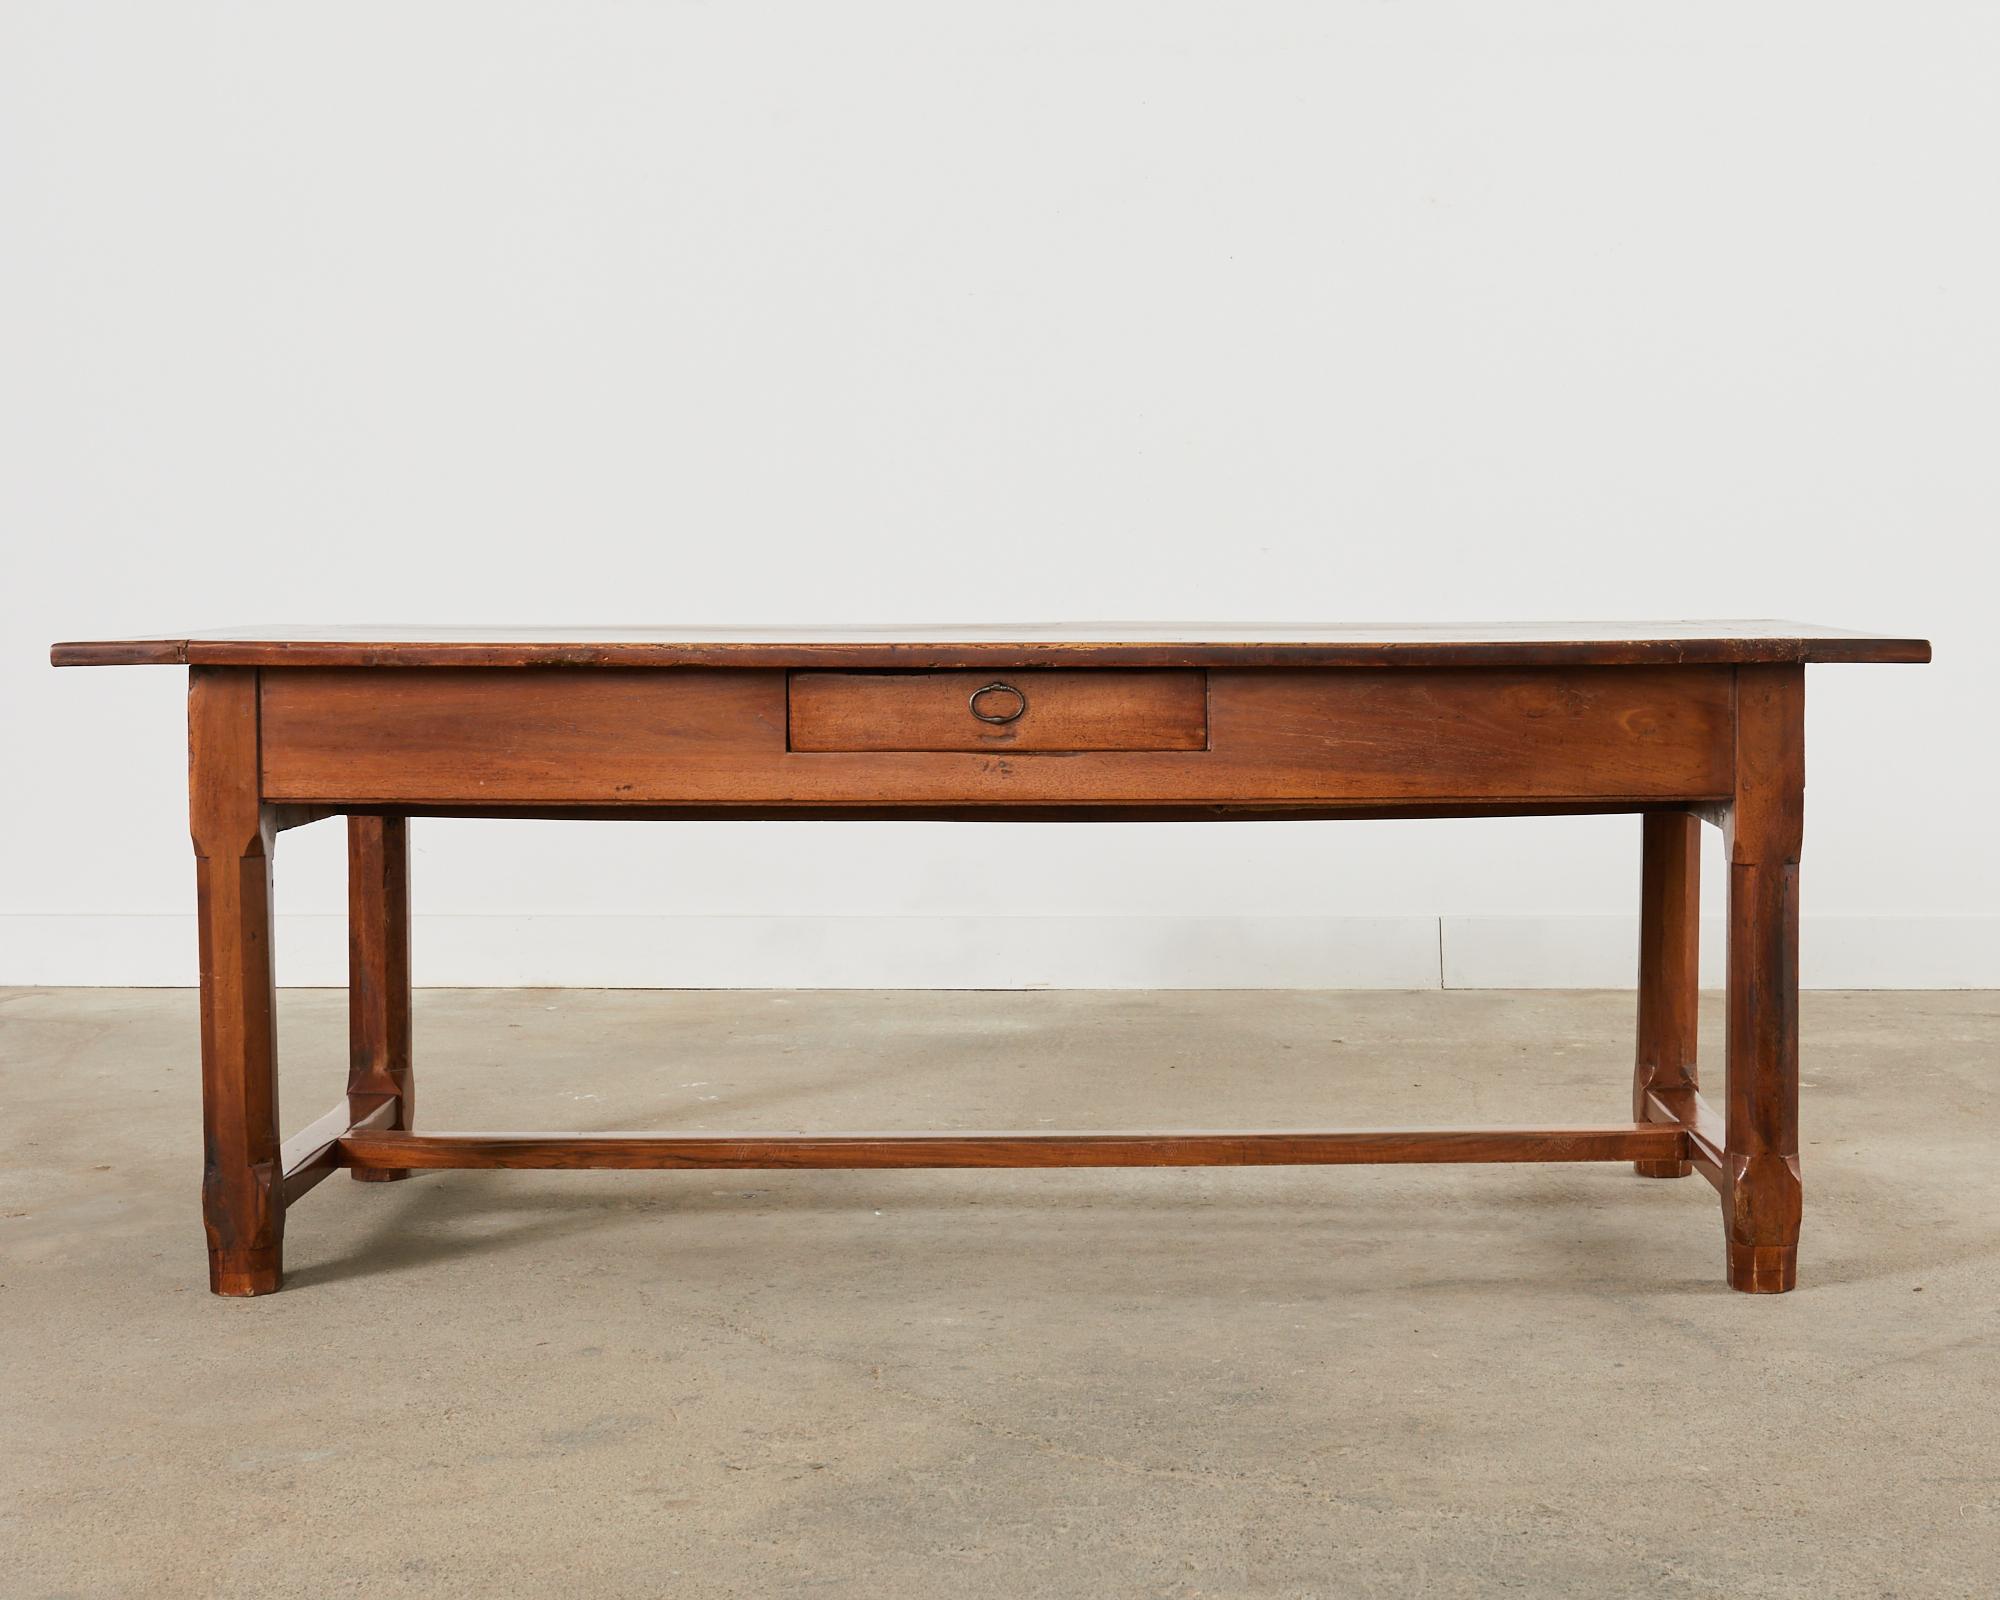 Hand-Crafted 19th Century Country French Provincial Walnut Farmhouse Trestle Table For Sale